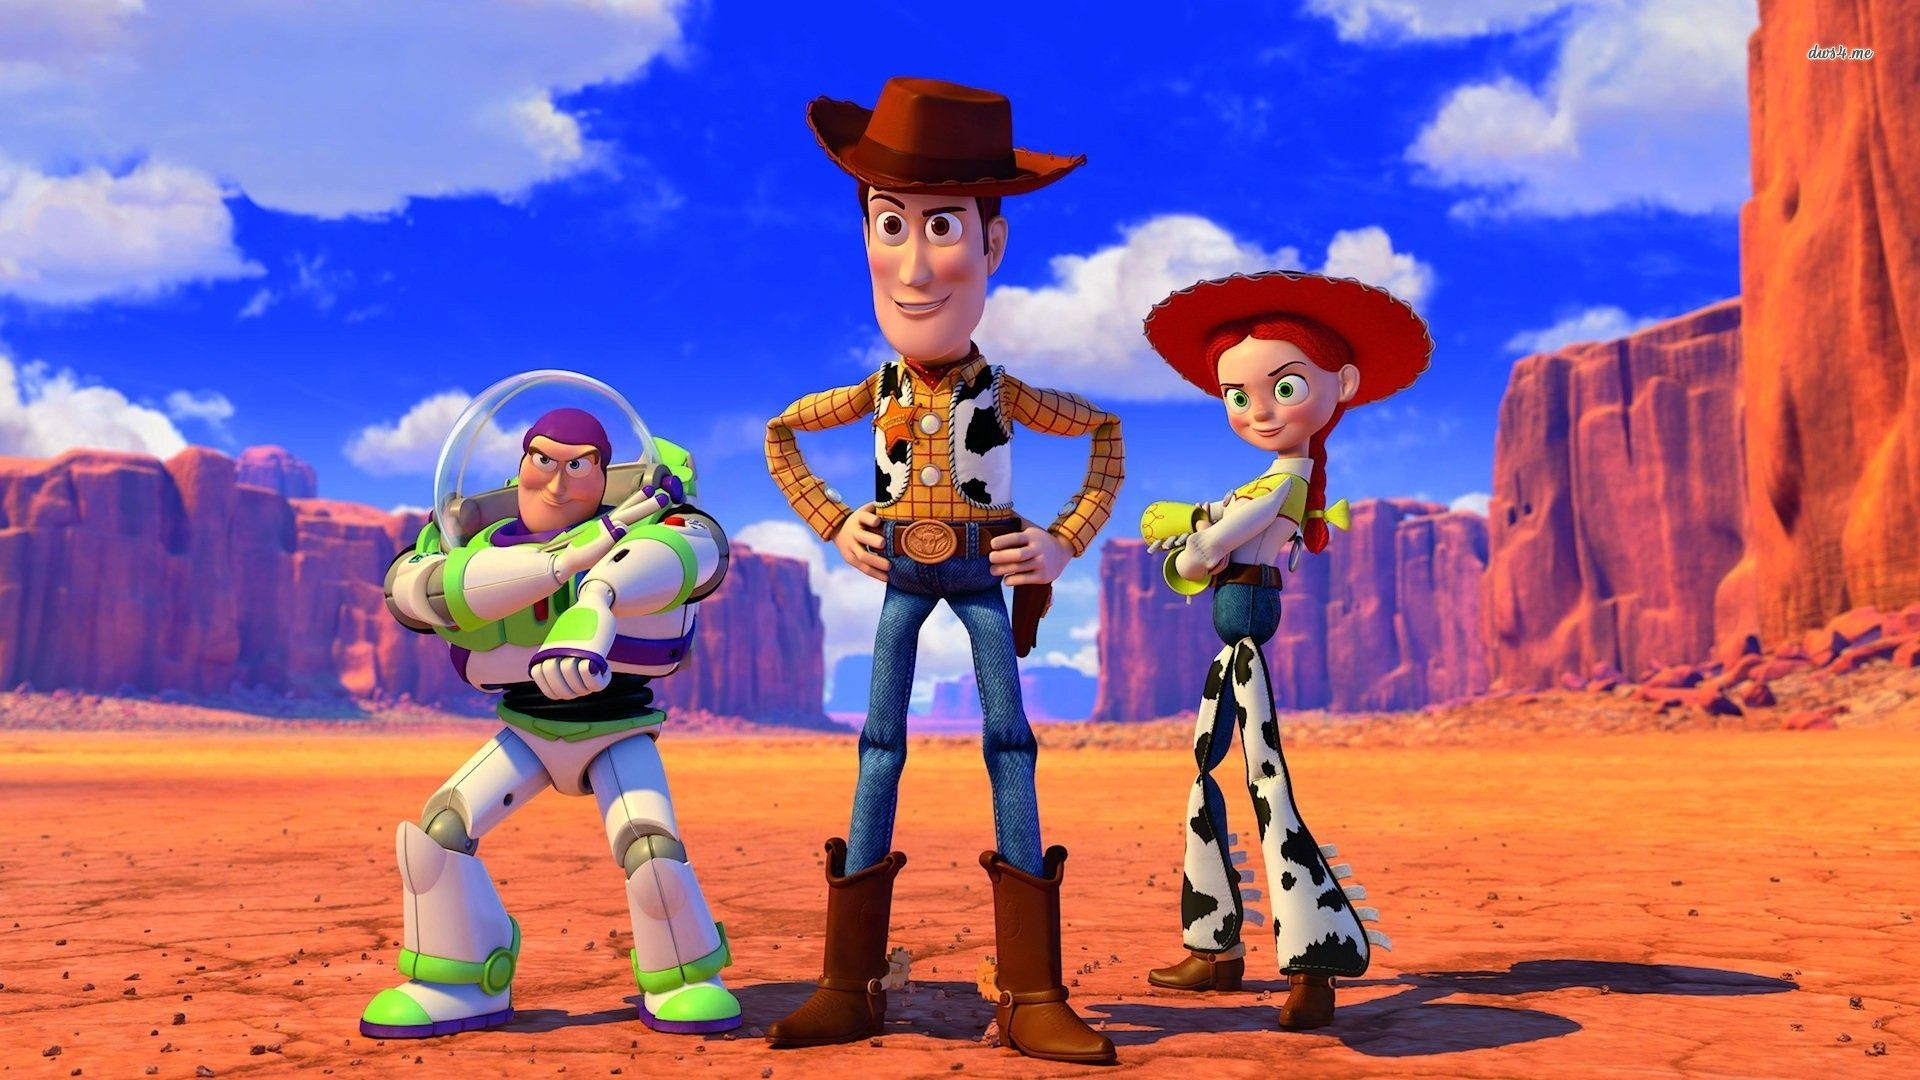 2019 Toy Story 4 Image, HD Movies 4K Wallpapers, Images and Background -  Wallpapers Den